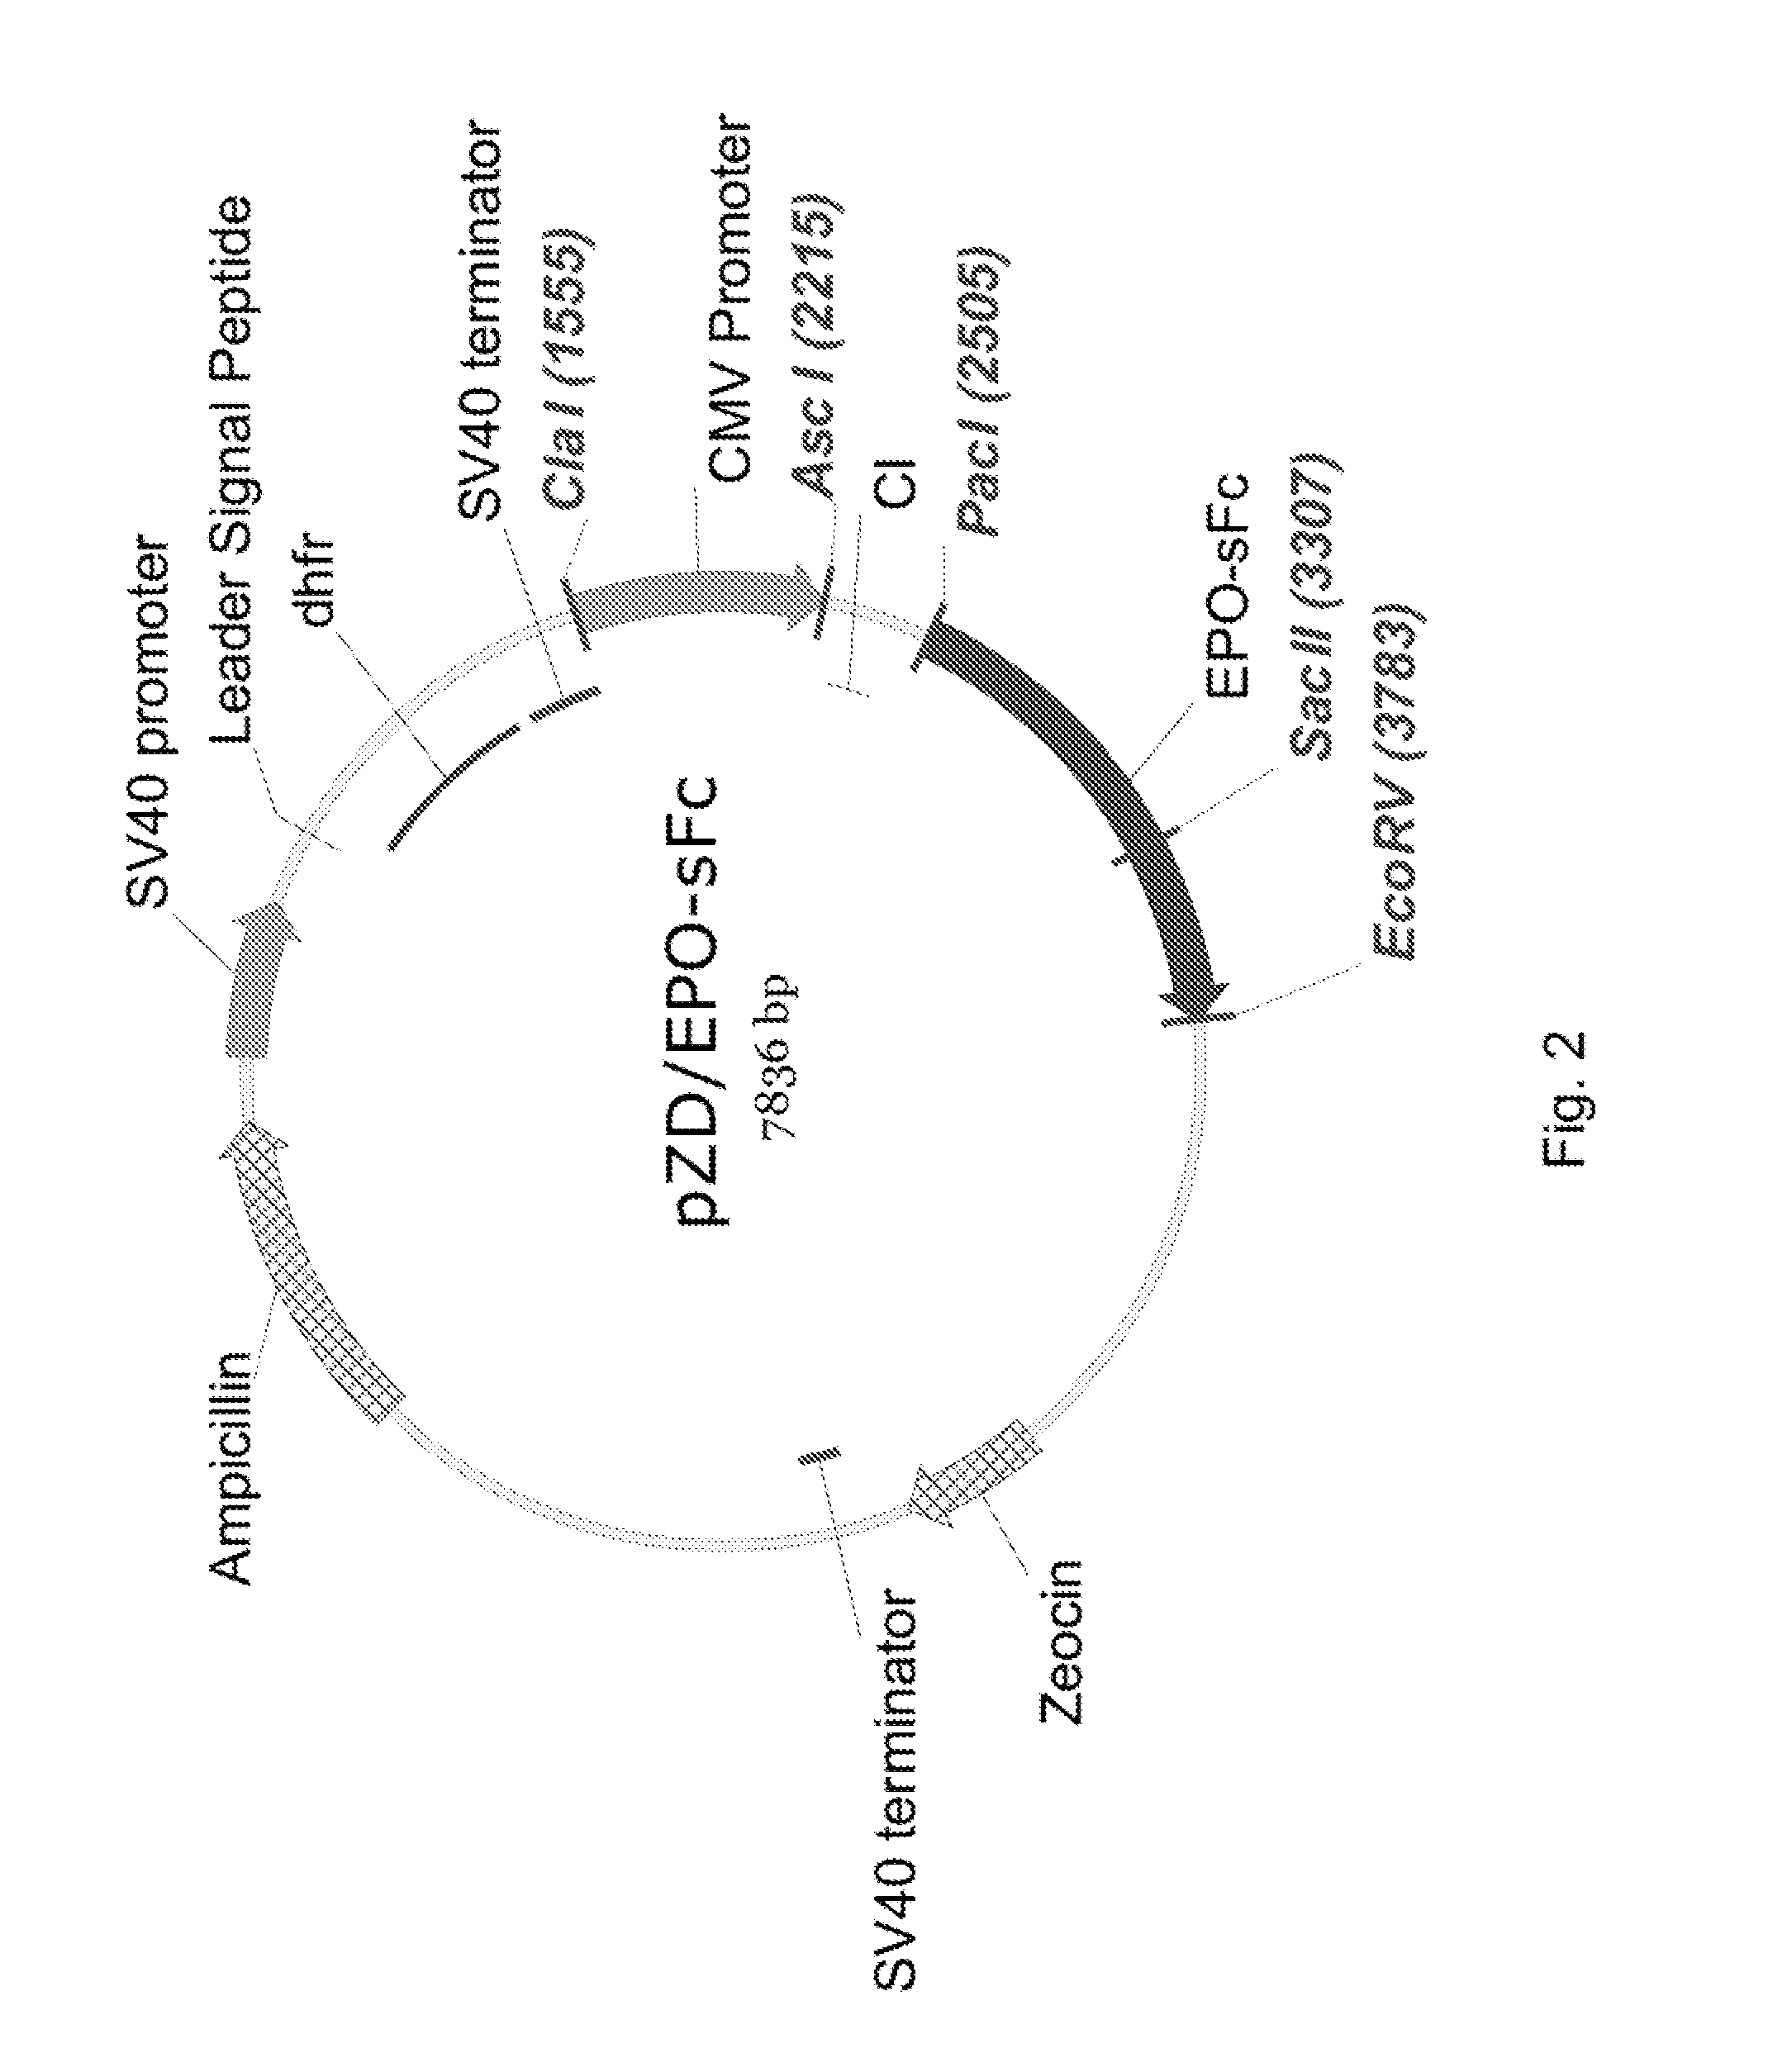 Immunoglobulin fusion proteins and uses thereof